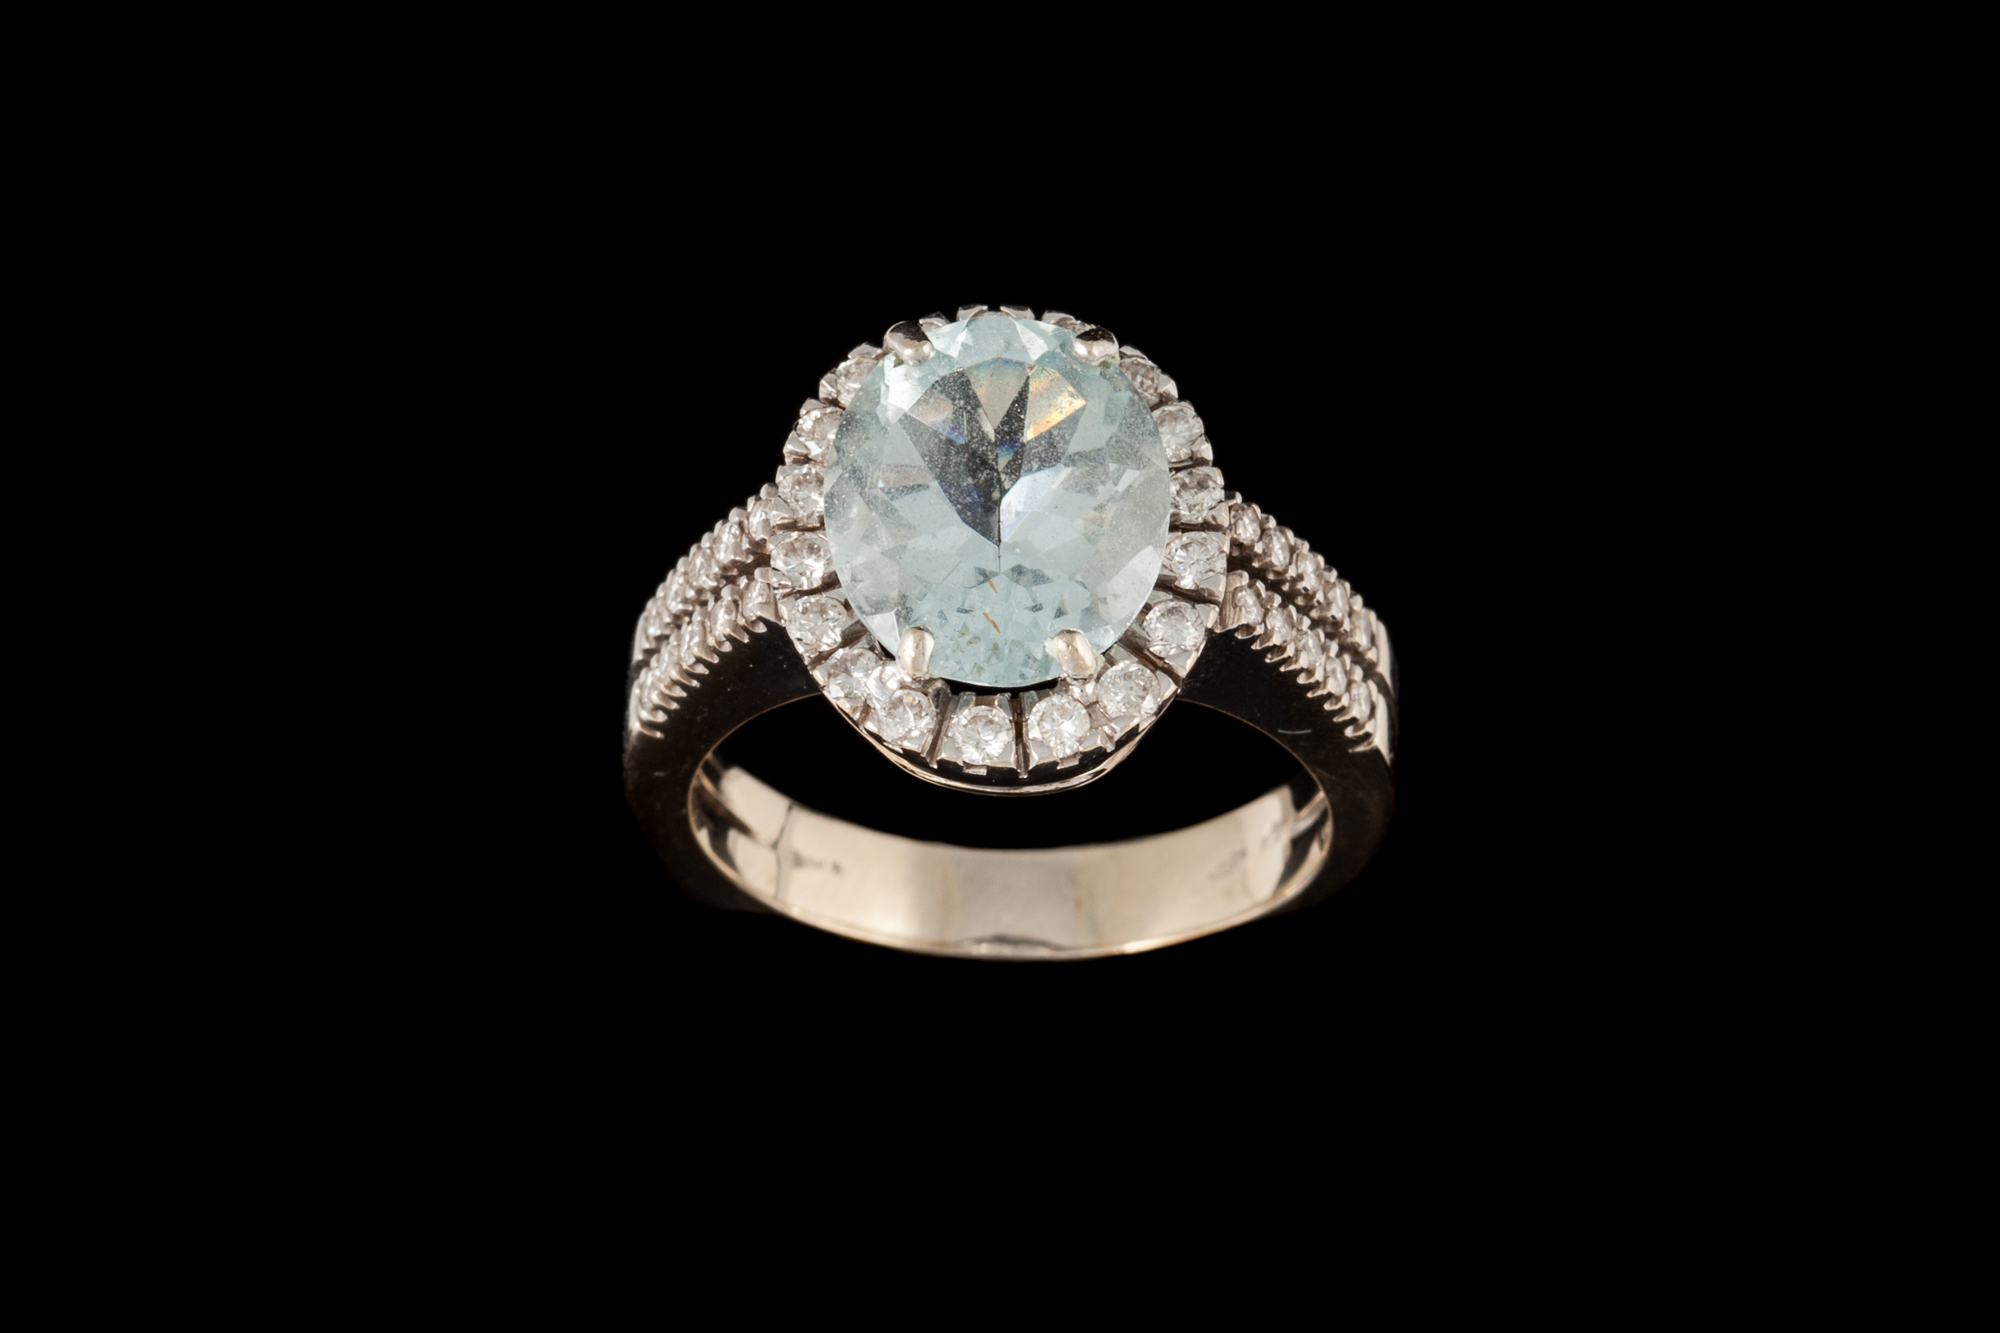 AN AQUAMARINE AND DIAMOND CLUSTER RING, with aquamarine of approx. 4.37ct, diamonds of approx. 1.